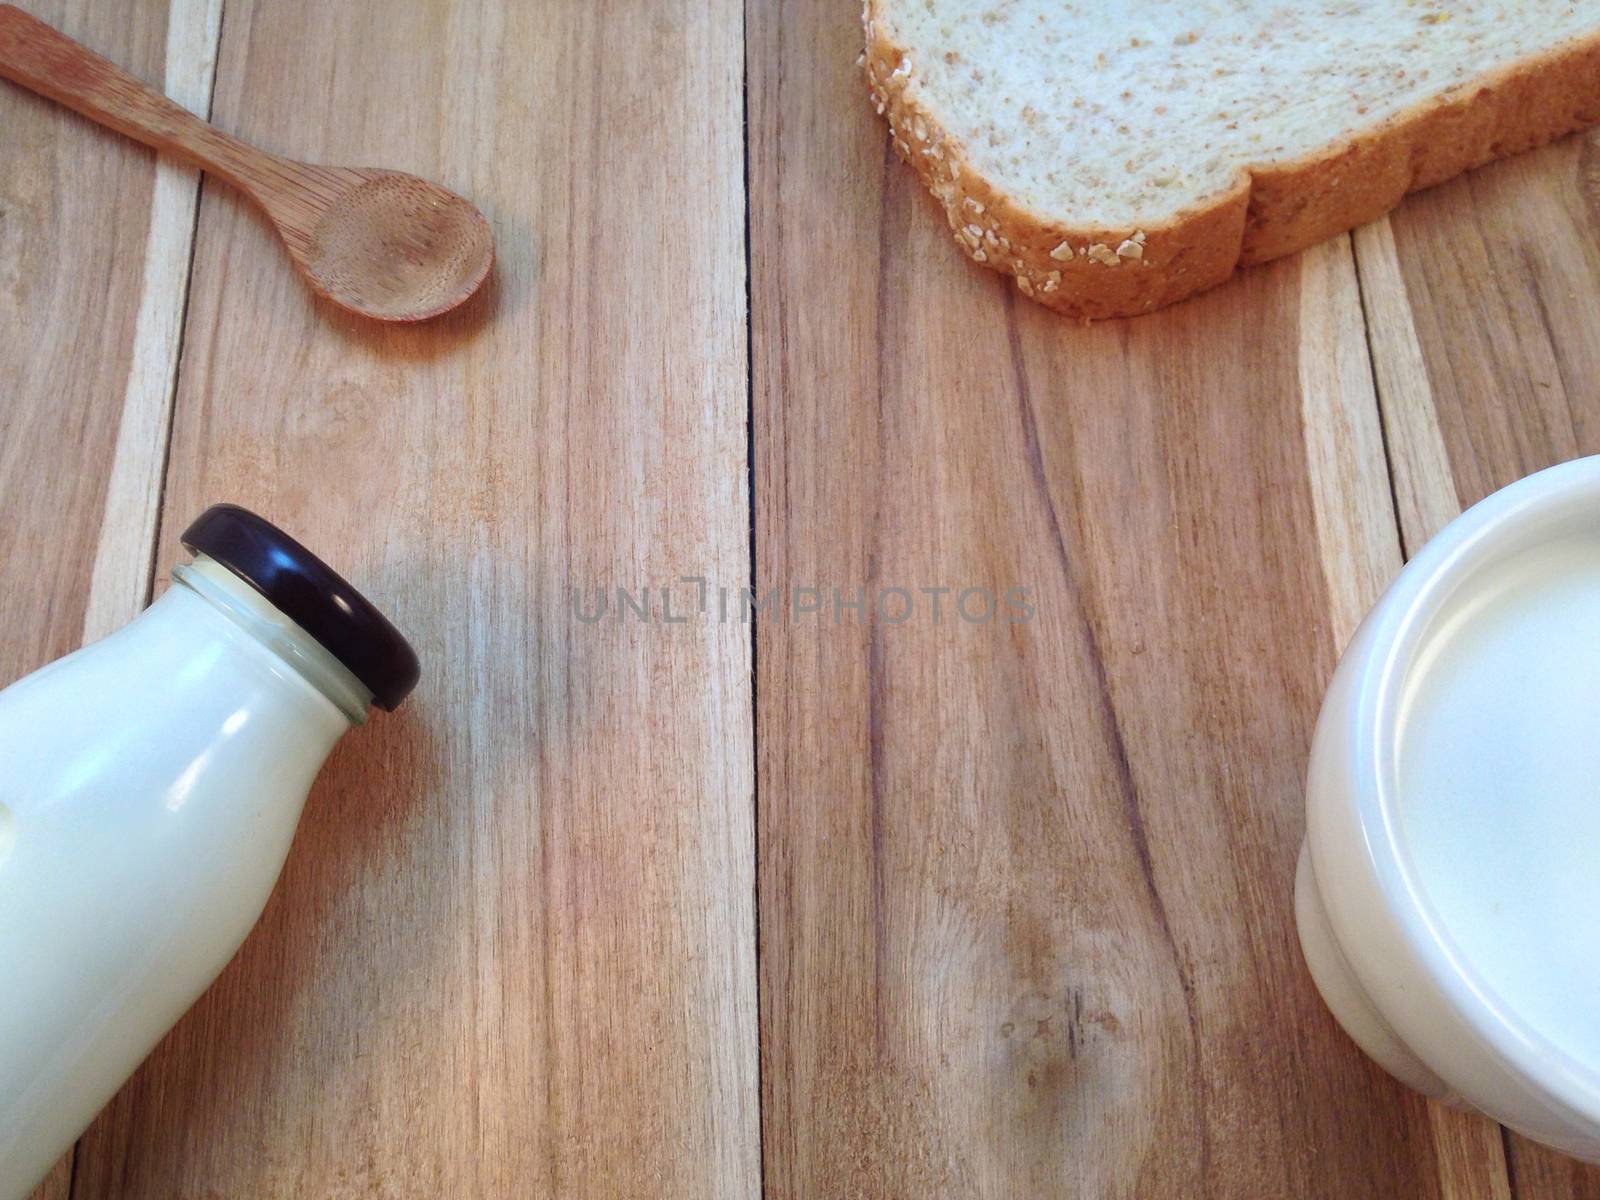 Slice of bread with bottle and cup of milk, wooden spoon on wooden background by Bowonpat